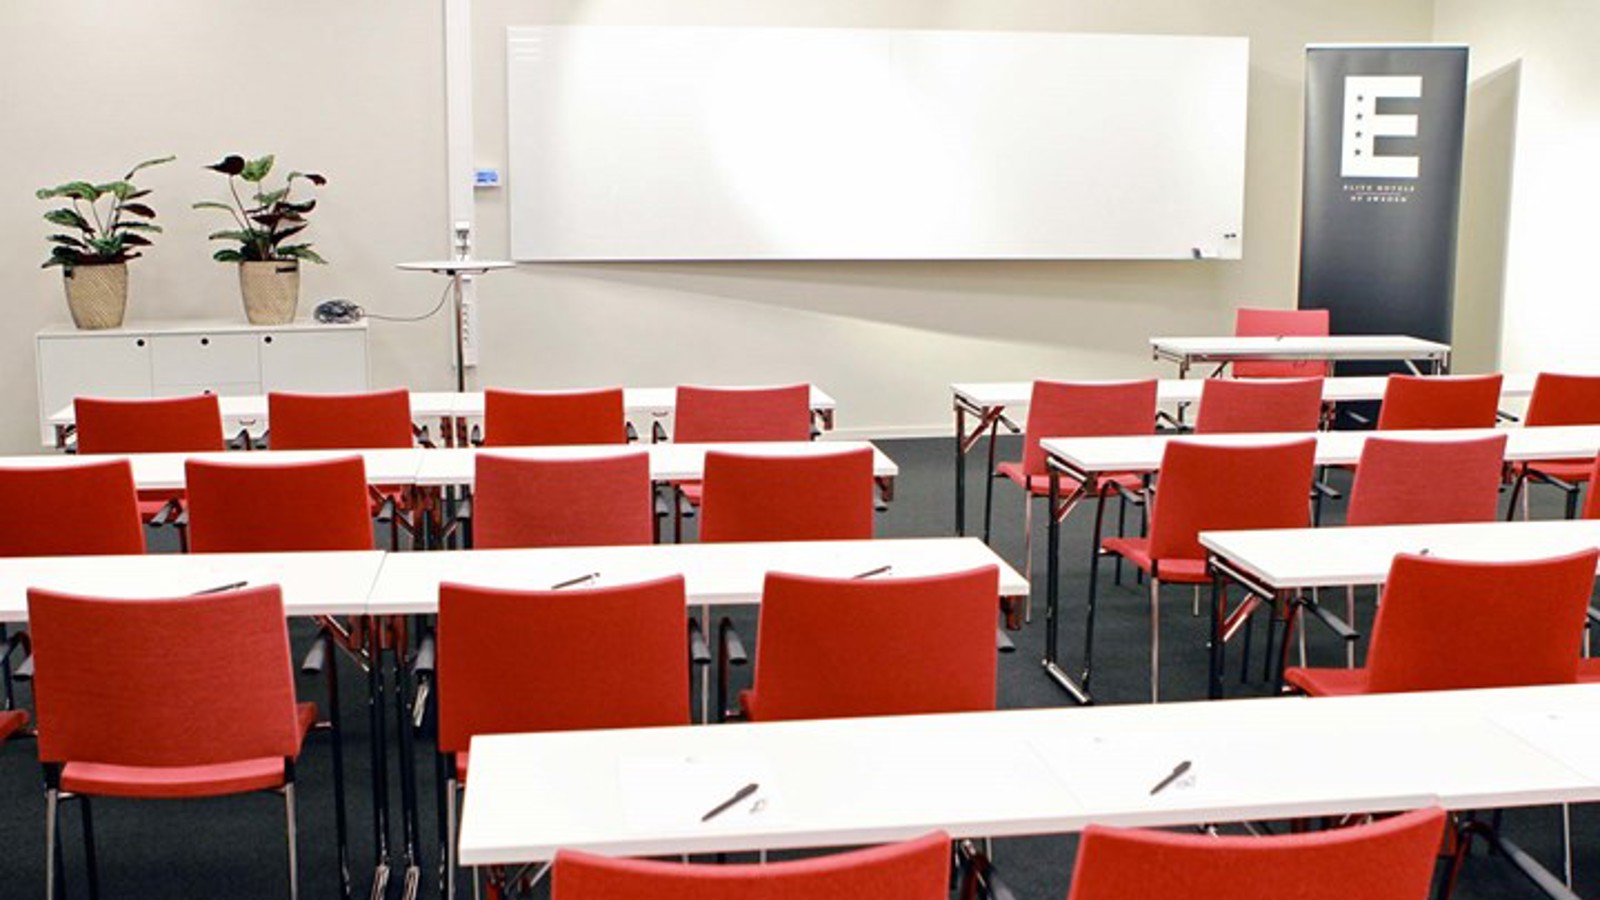 Conference room with school seating, white tables, red chairs